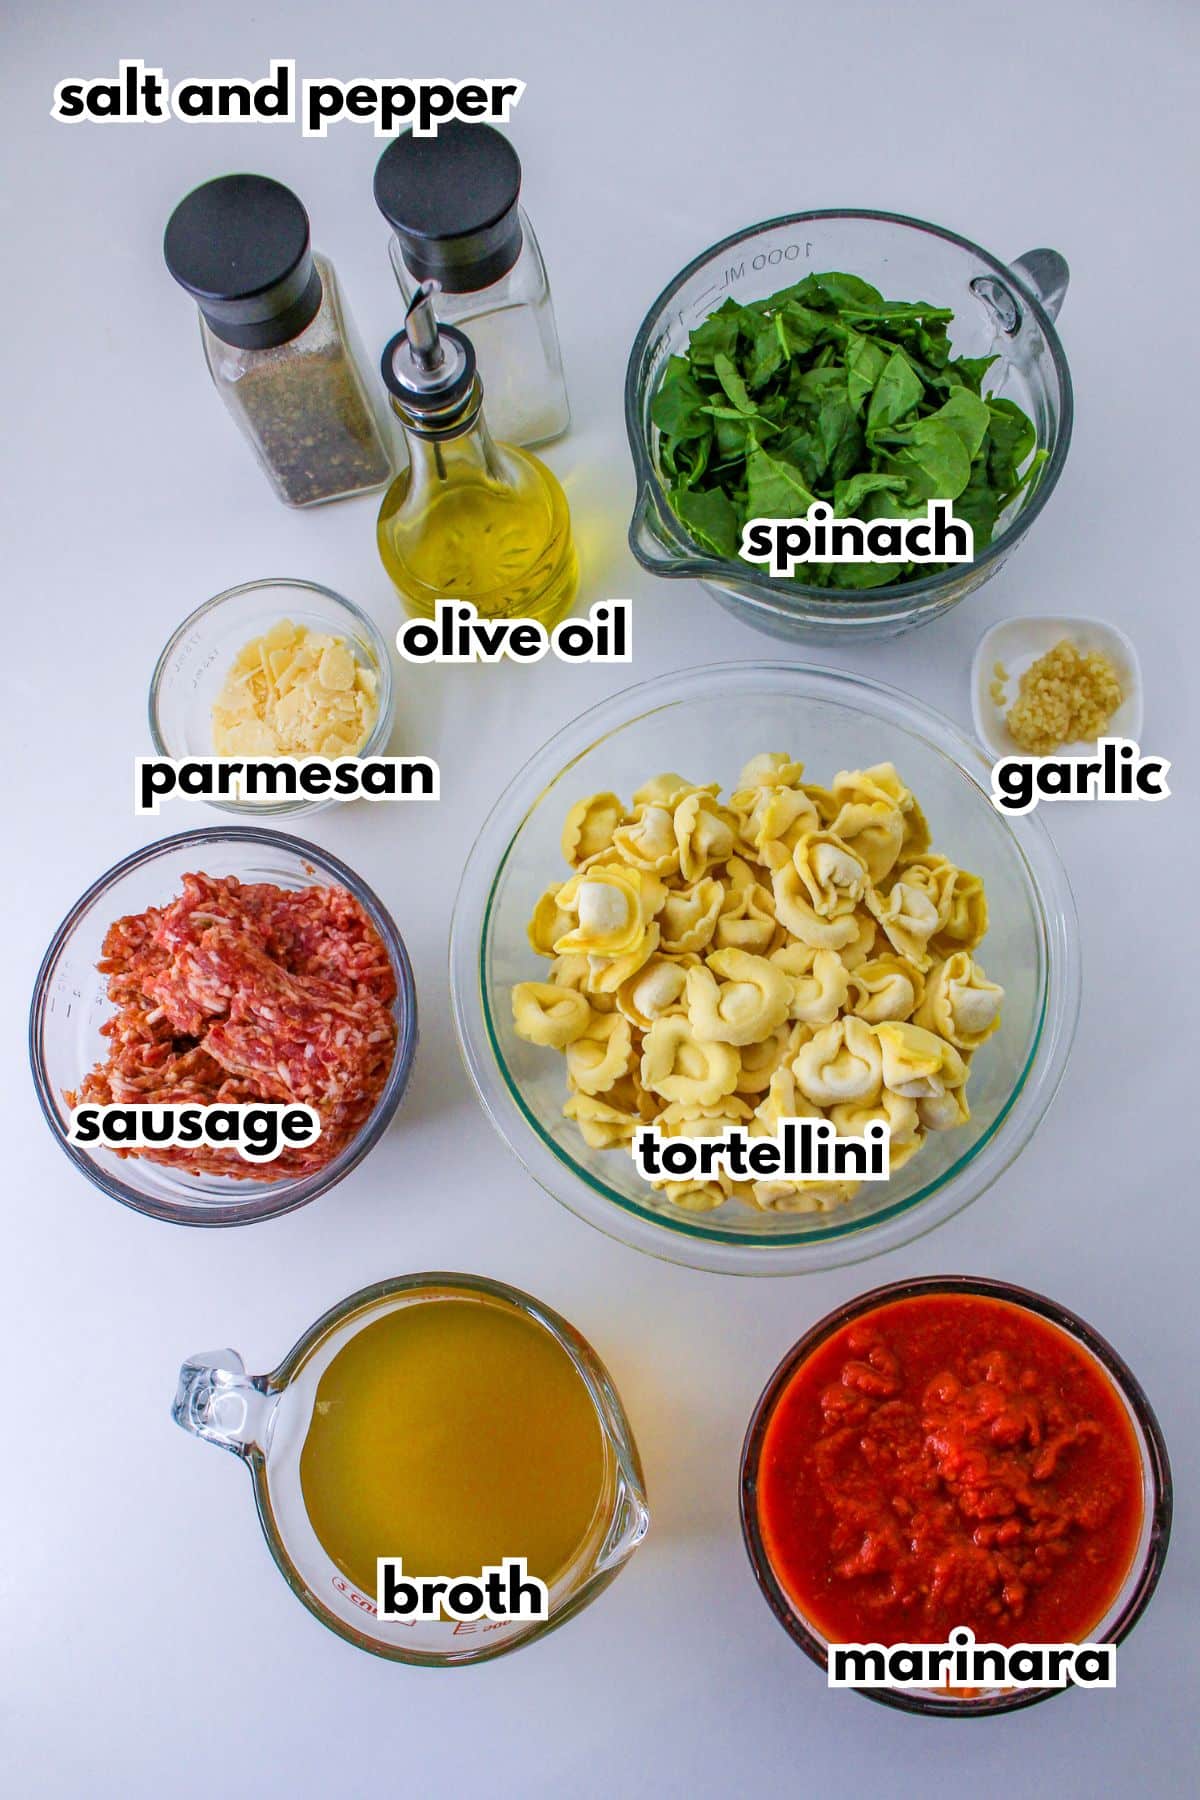 bowls of salt and pepper, olive oil, spinach, sausage, parmesan, garlic, tortellini, broth, and marinara sauce.